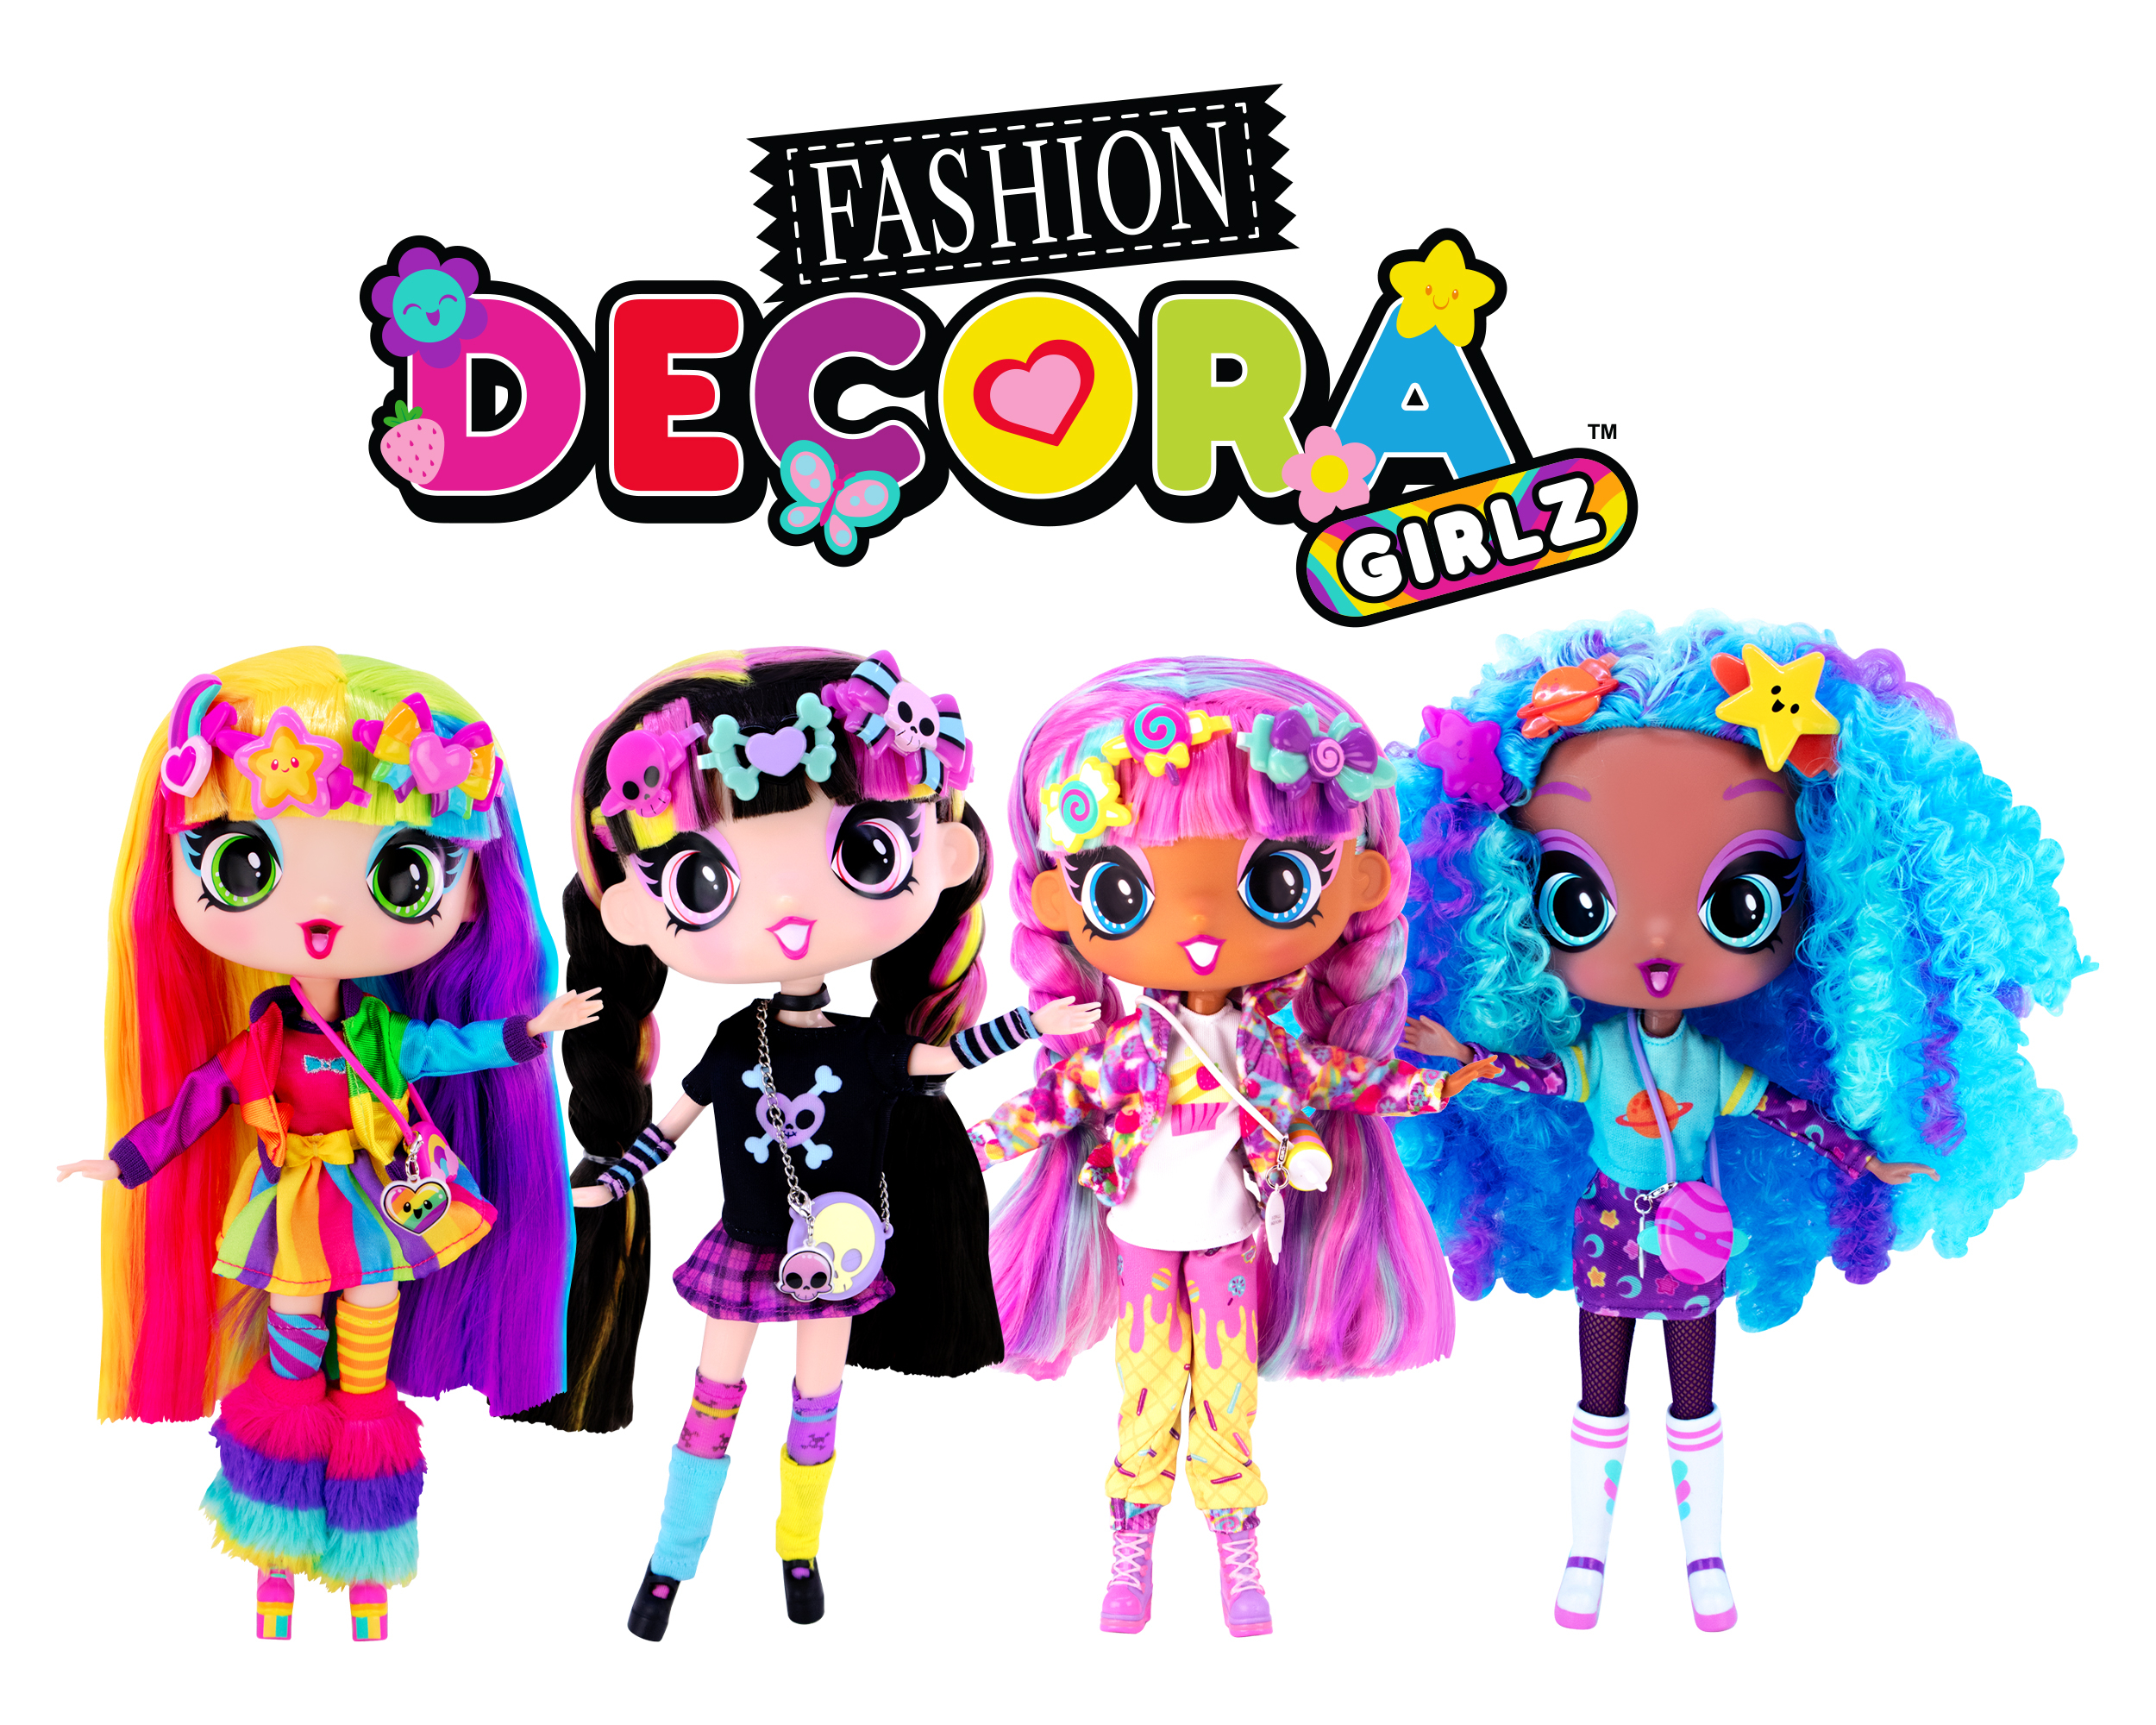 More photos of the Fashion Decora Girlz dolls!! I LOVE THESE!! These are  the full sized fashion dolls. Retail of around $25 - launching S